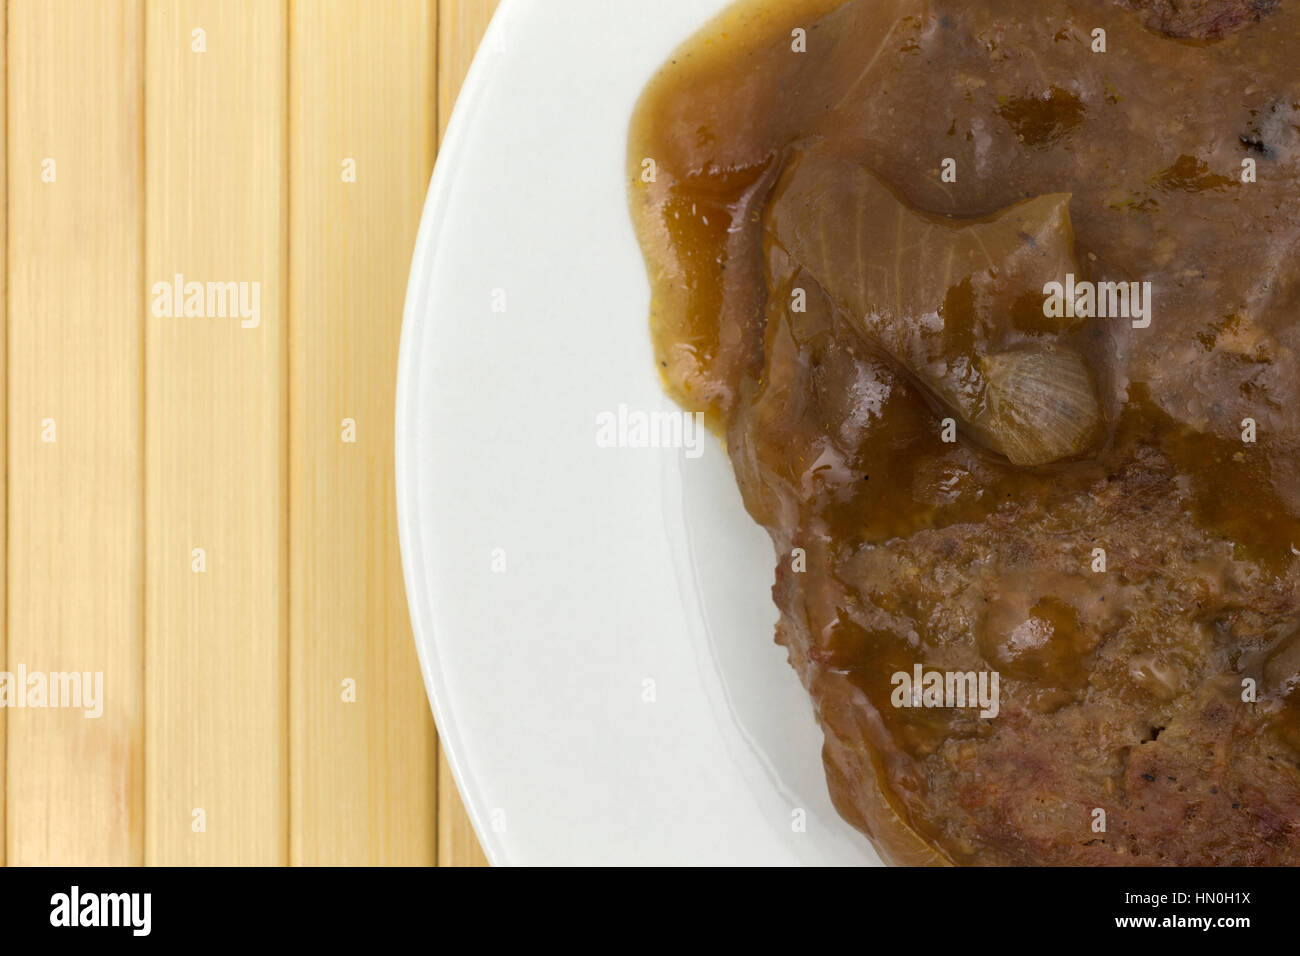 Top close view of salisbury steak with gravy on a plate atop a wood place mat. Stock Photo